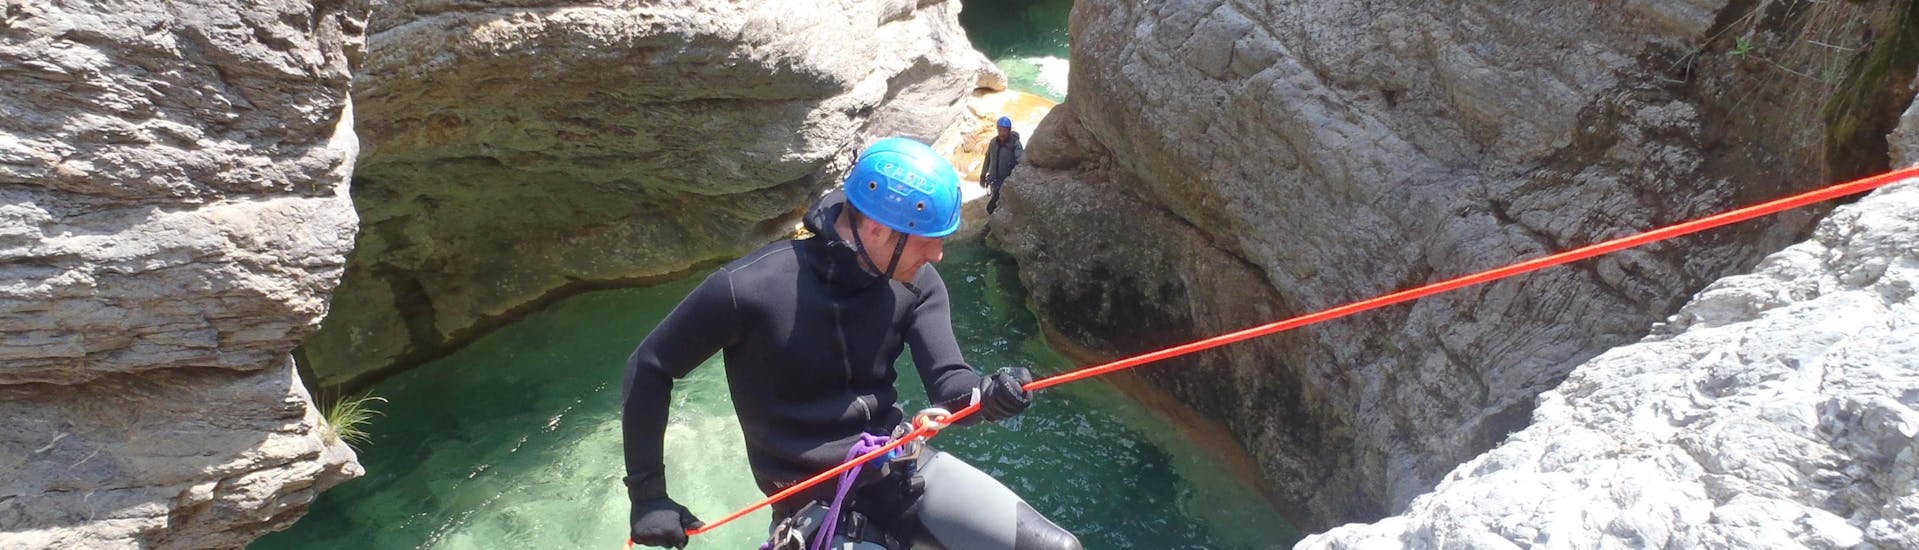 Gevorderde Canyoning in Bevera - Canyon of Barbaira.